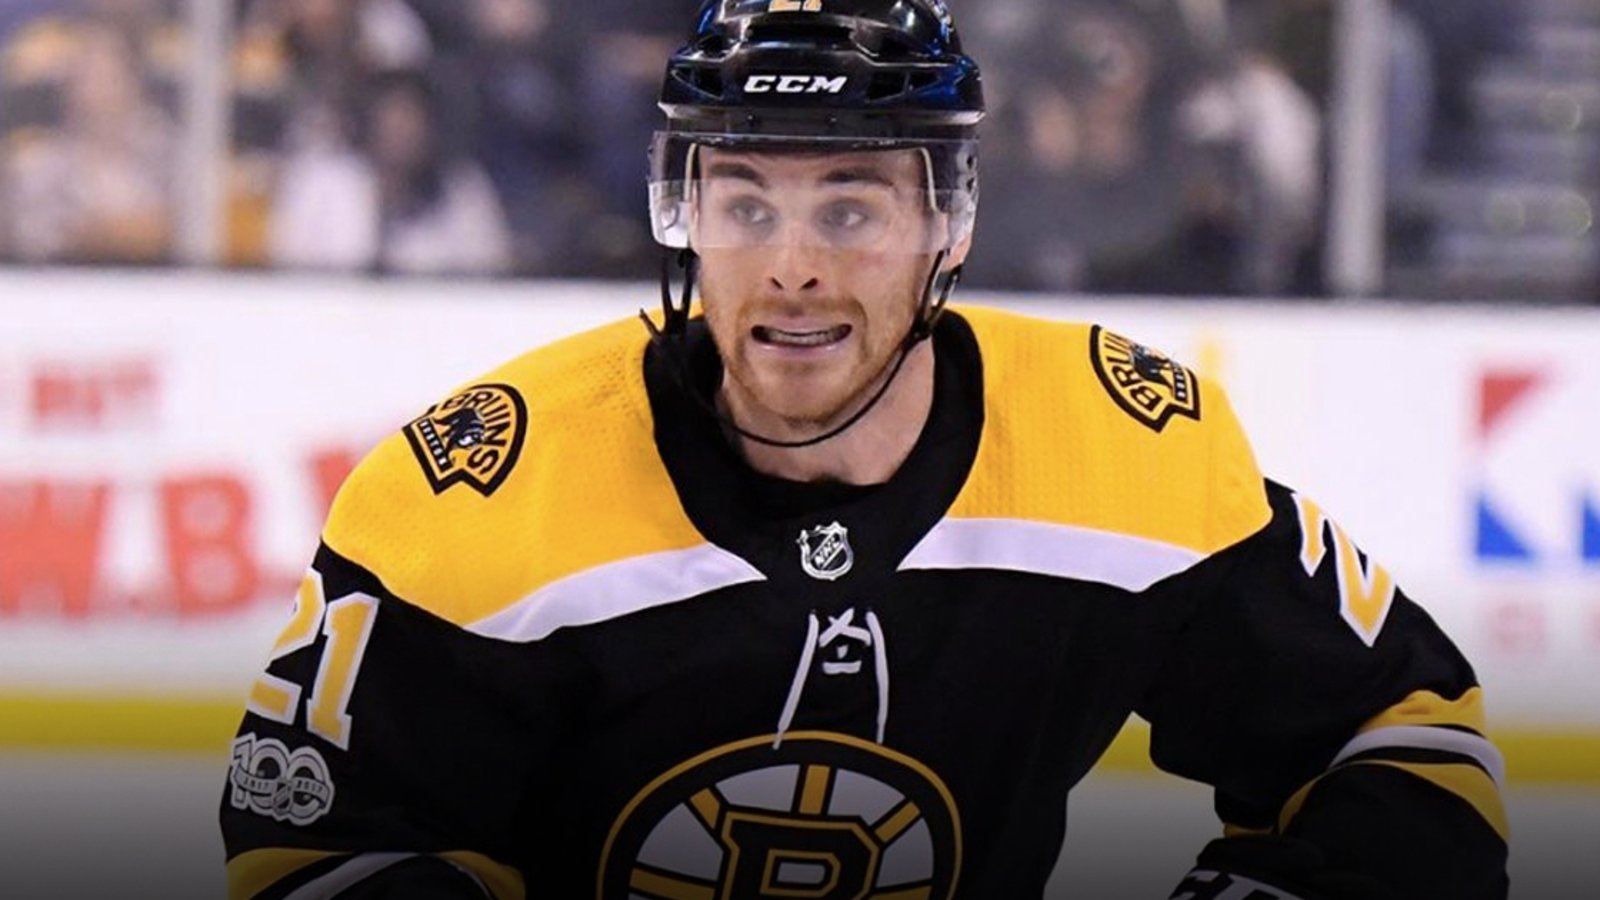 Breaking: Bruins make emergency recall from the AHL